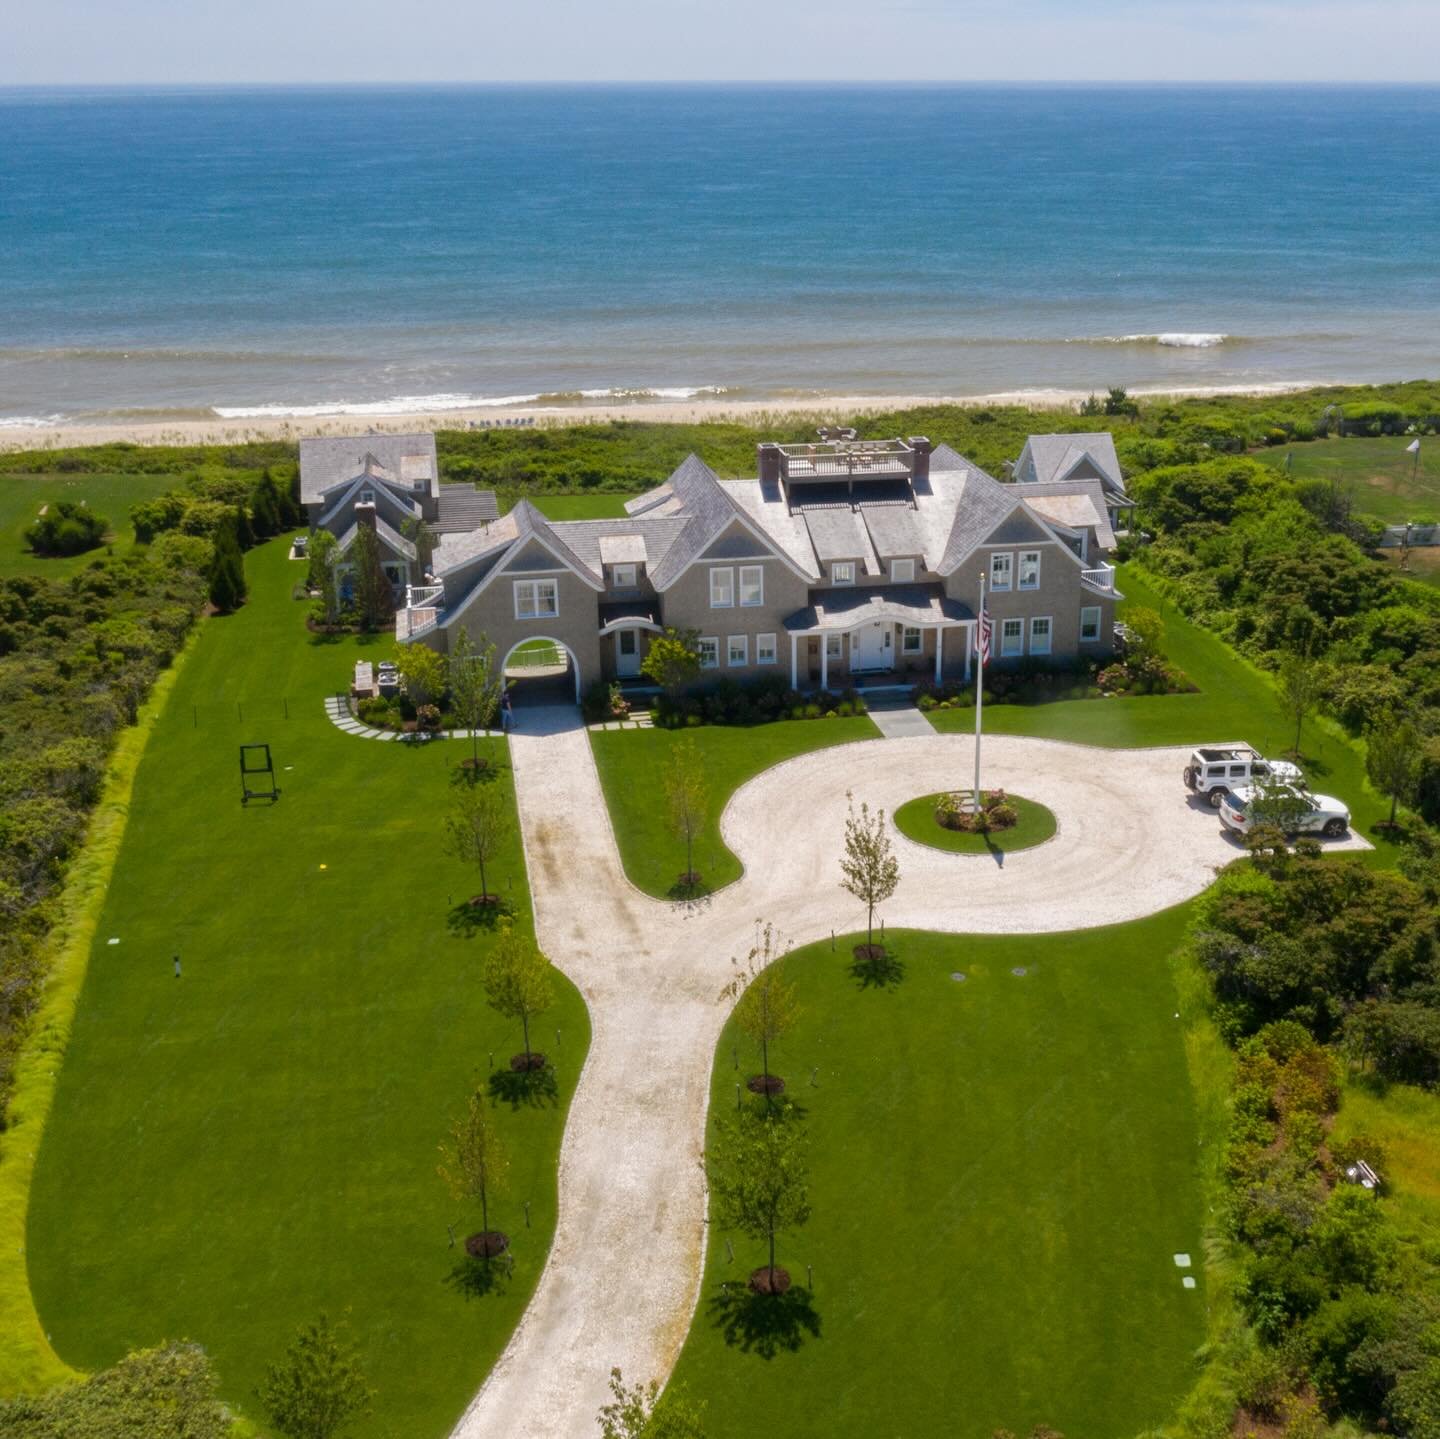 M&eacute;tier Maison Monday | Vacation in Nantucket 

The ultimate Summer escape, Nantucket is the casual upscale vacation destination of your dreams. This stunning waterfront compound is perfect for entertaining with an expansive living room area an